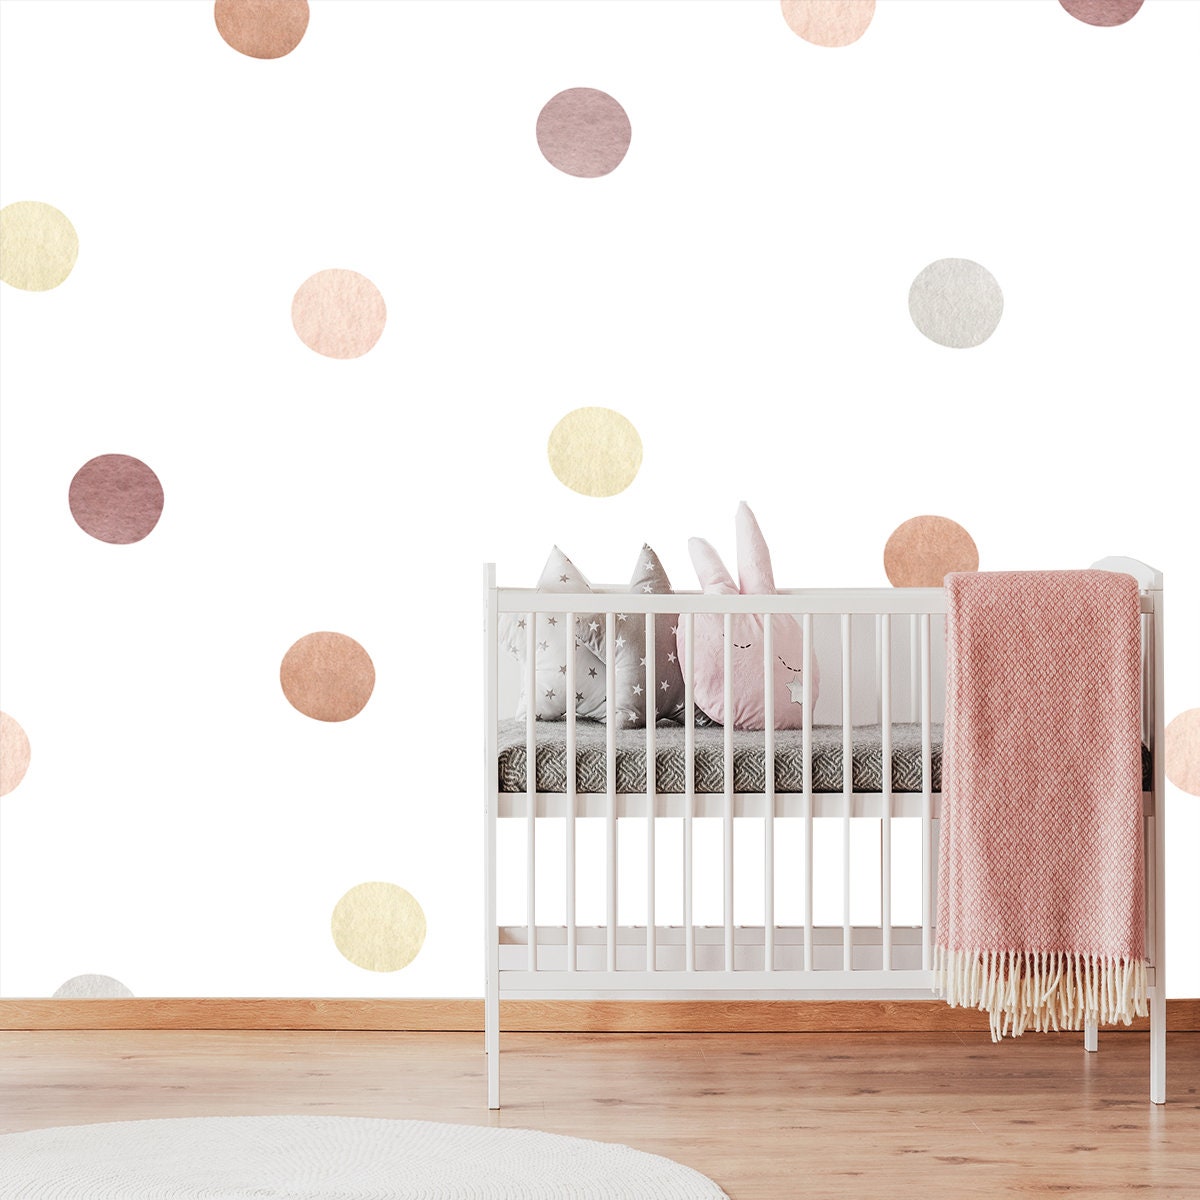 Watercolor Abstract Pastel Geometric.  Freehand Aesthetic Background with Polka Dot Wallpaper Girl Nursery Mural